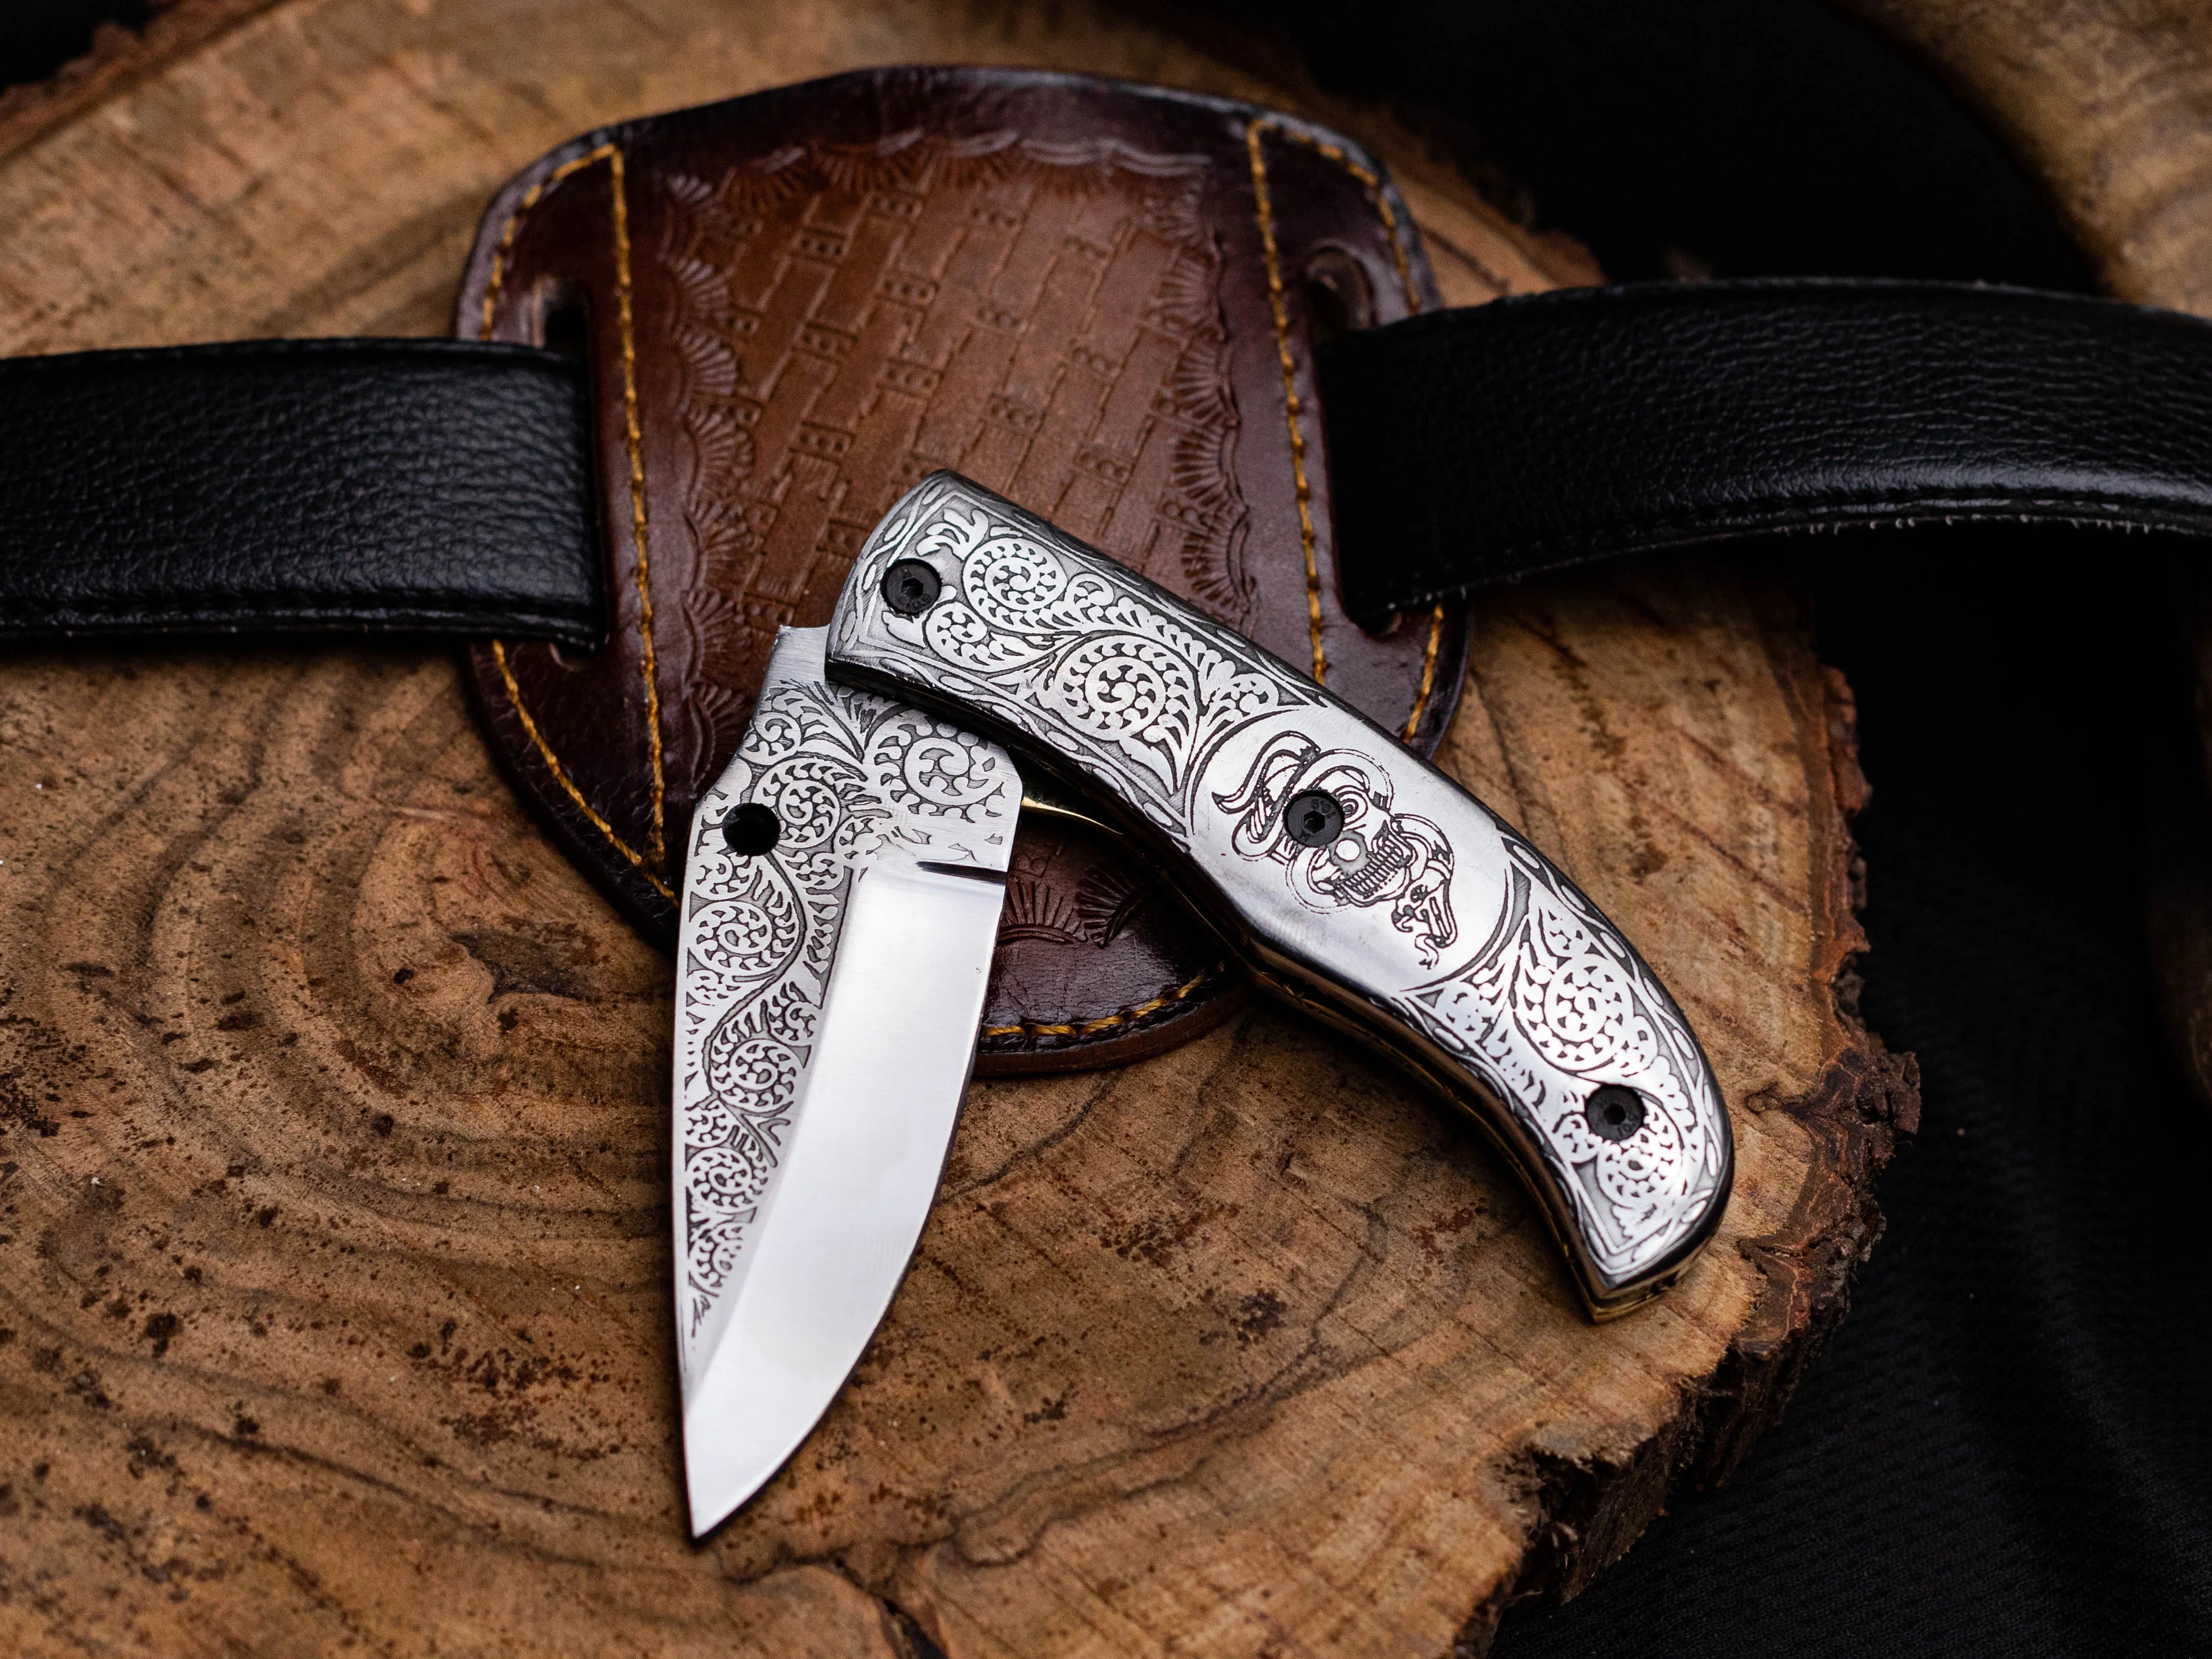 Stainless Steel Folding Knife - Engraved Pocket Knife With Leather Sheath